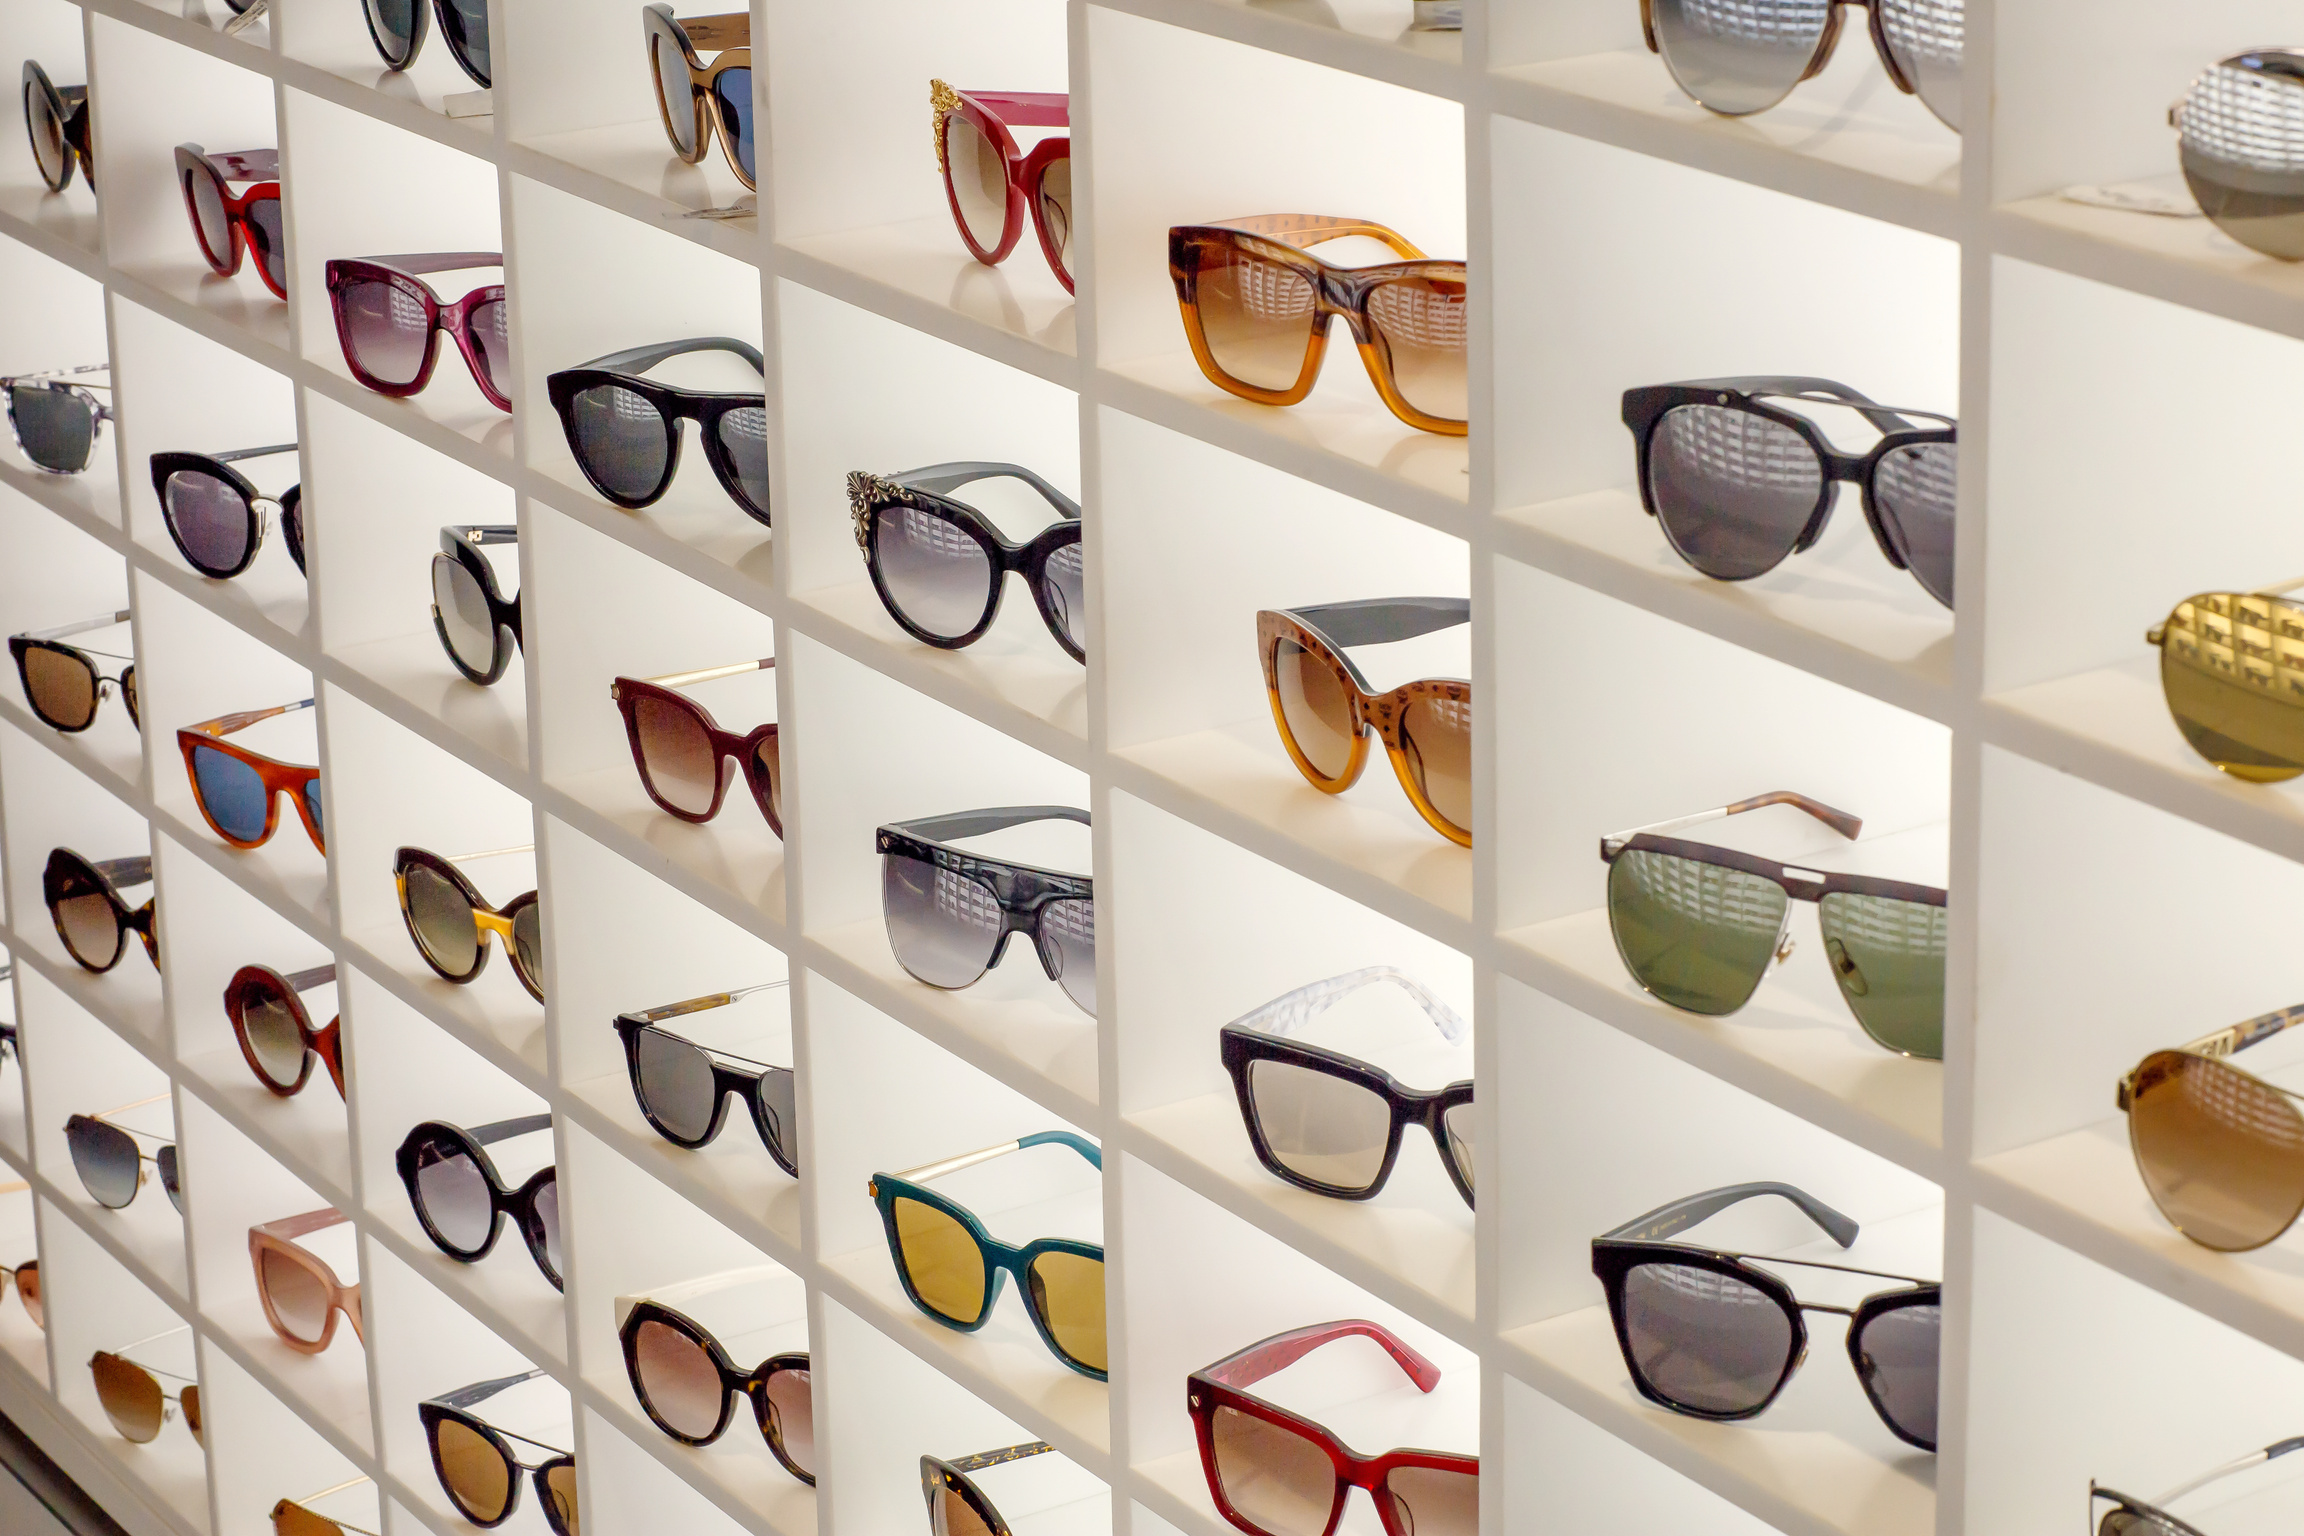 Various different sunglasses in the shop display shelves